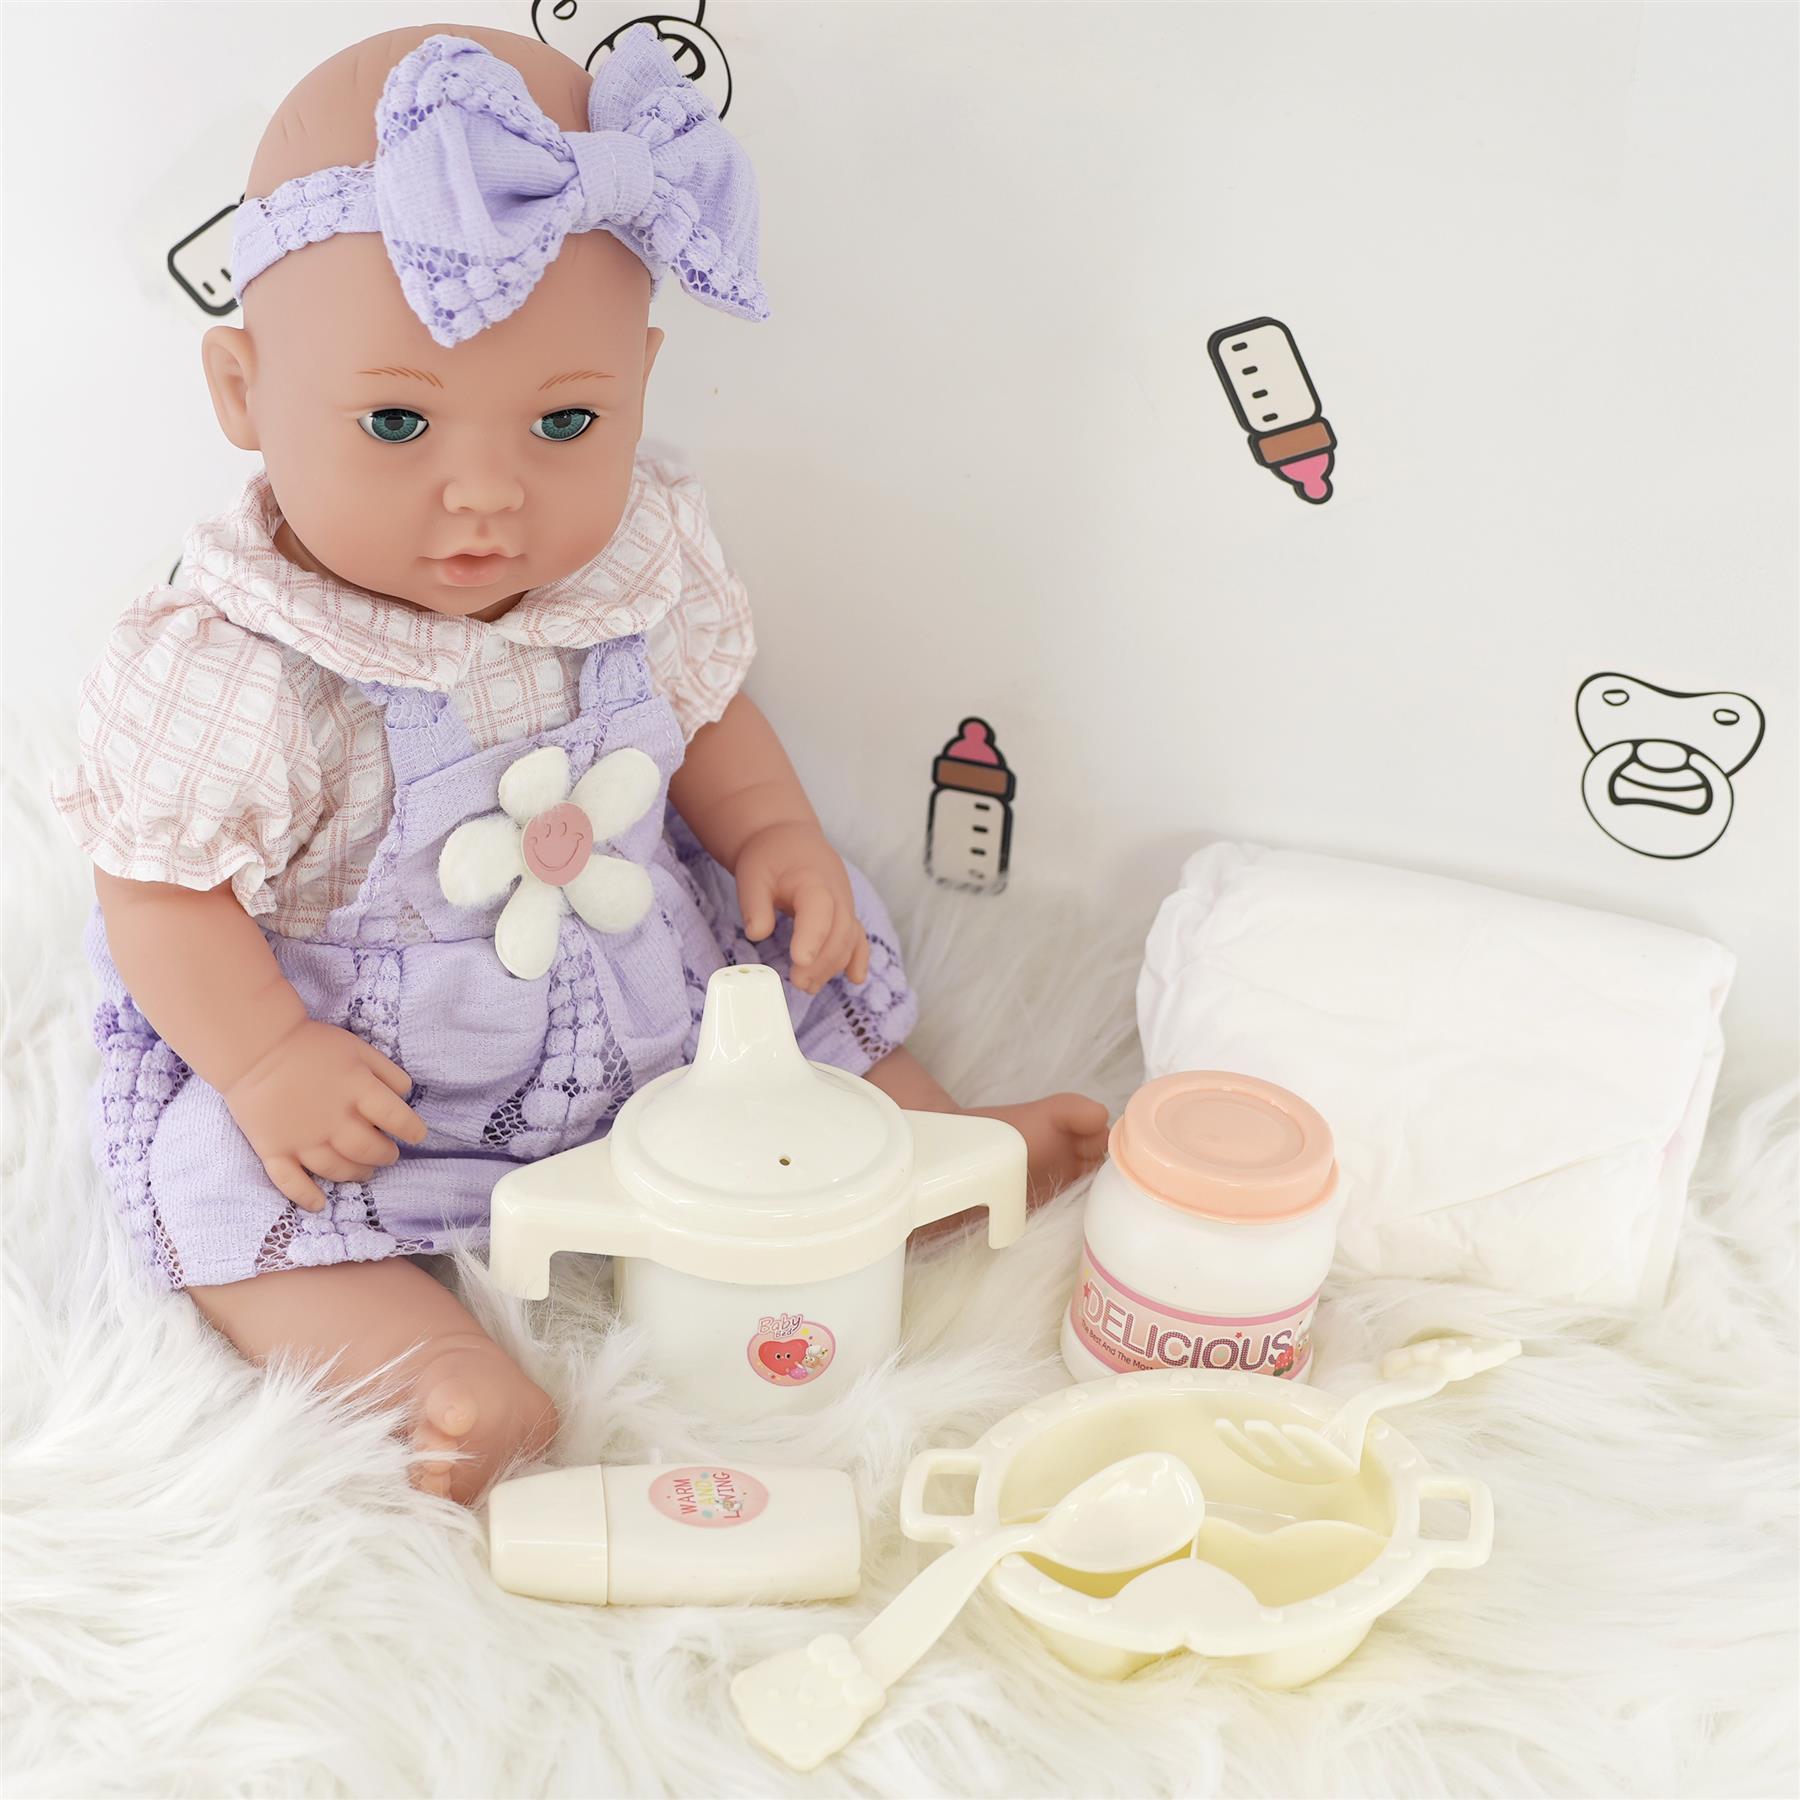 16" Baby Doll with Accessories by BiBi Doll - The Magic Toy Shop